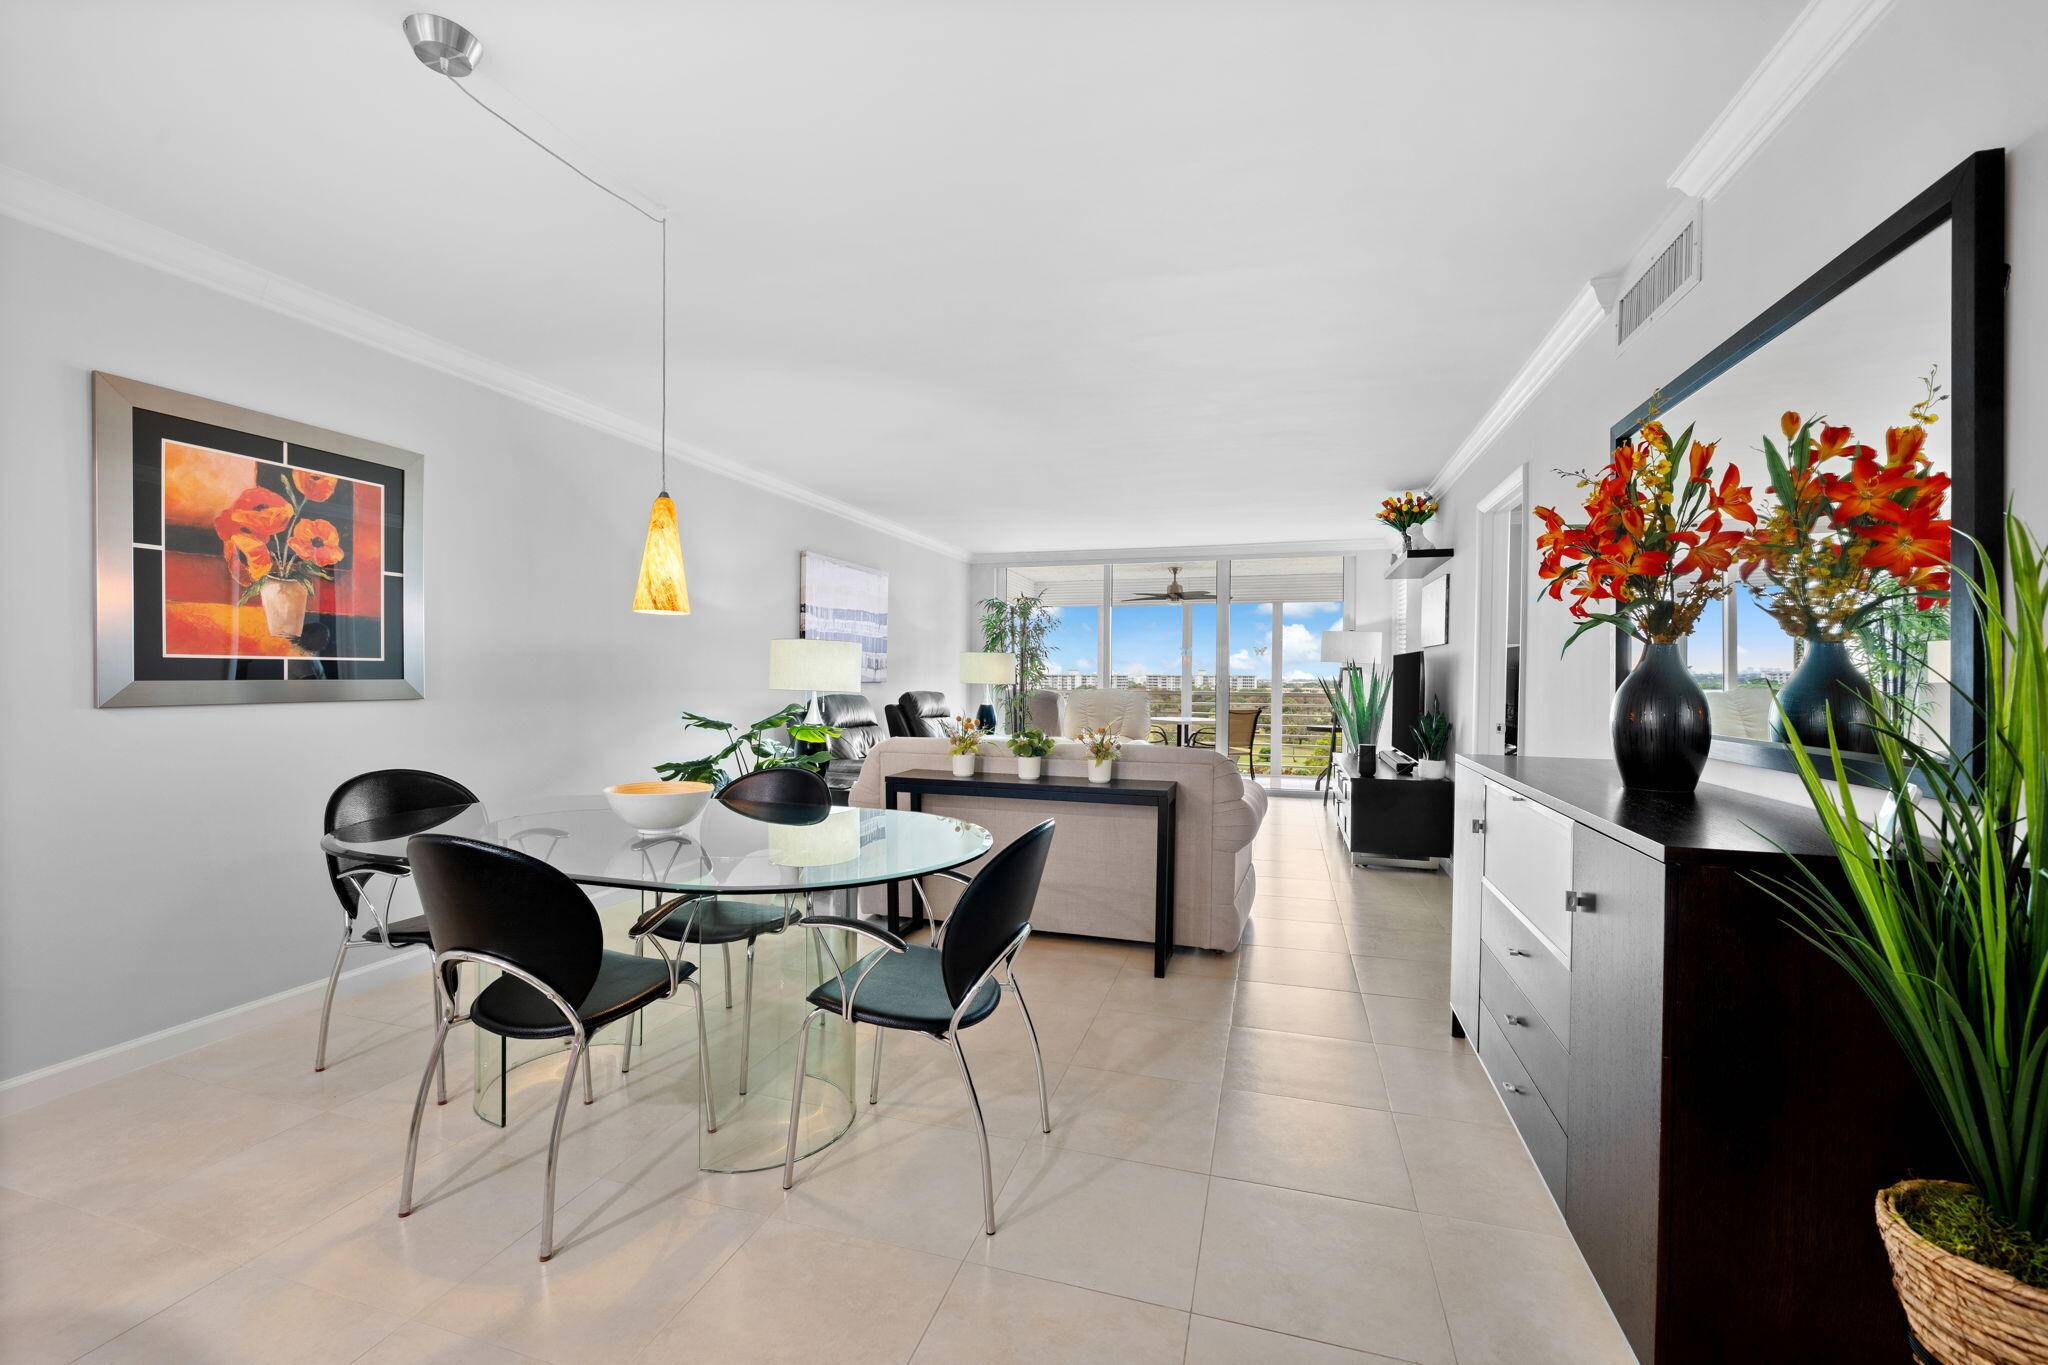 5000 month 3 months. Turn Key, 2 bedroom 2 bath, fully renovated and elegantly furnished with spectacular views.